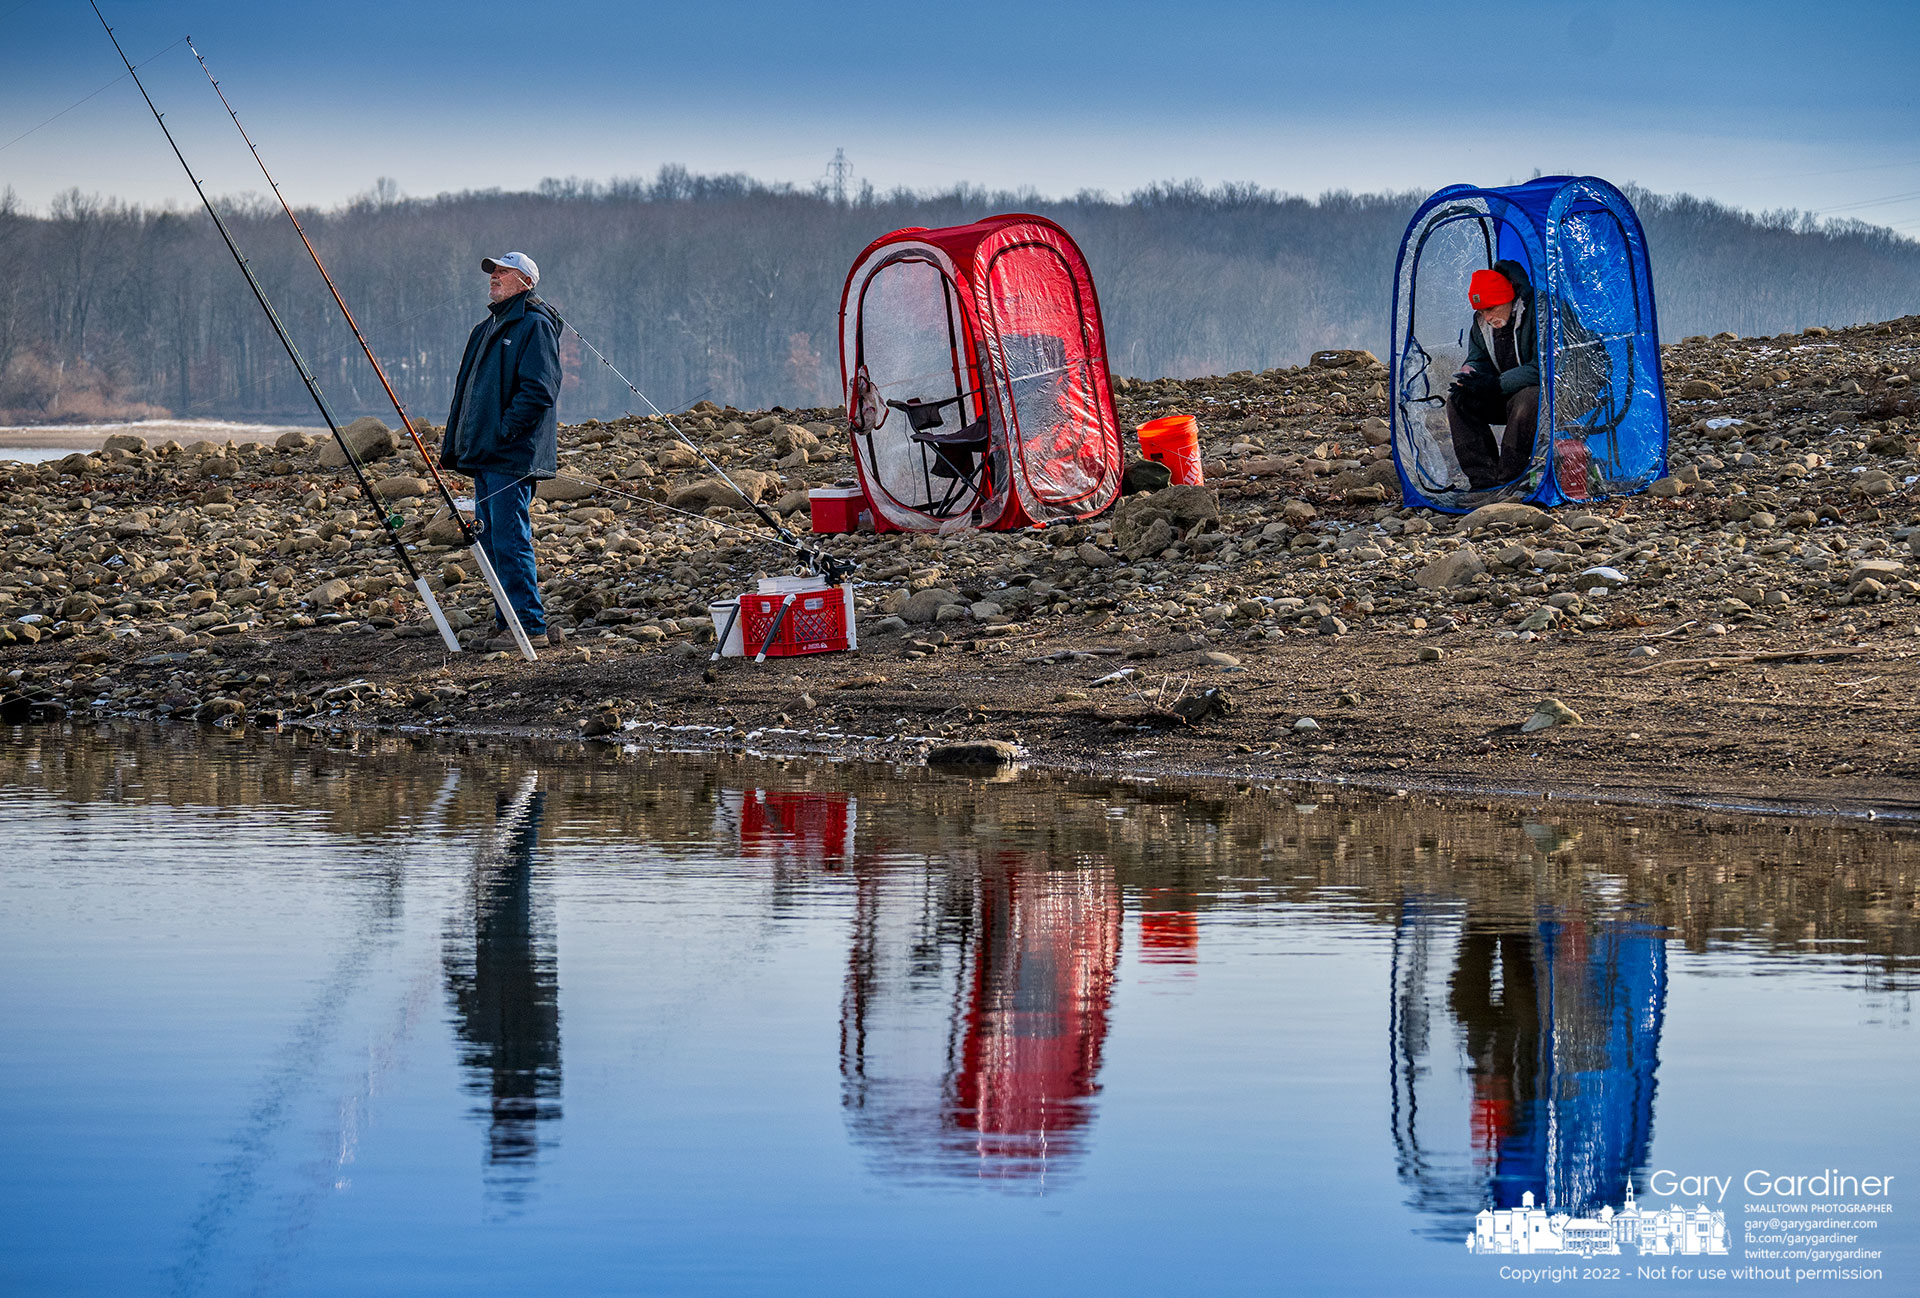 A pair of fishermen take advantage of clear skies and a light breeze to cast their lures into the waters of Hoover Reservoir hoping for a bit of luck before the weather becomes too cold even for their portable fishing shelters. My Final Photo for December 20, 2022.